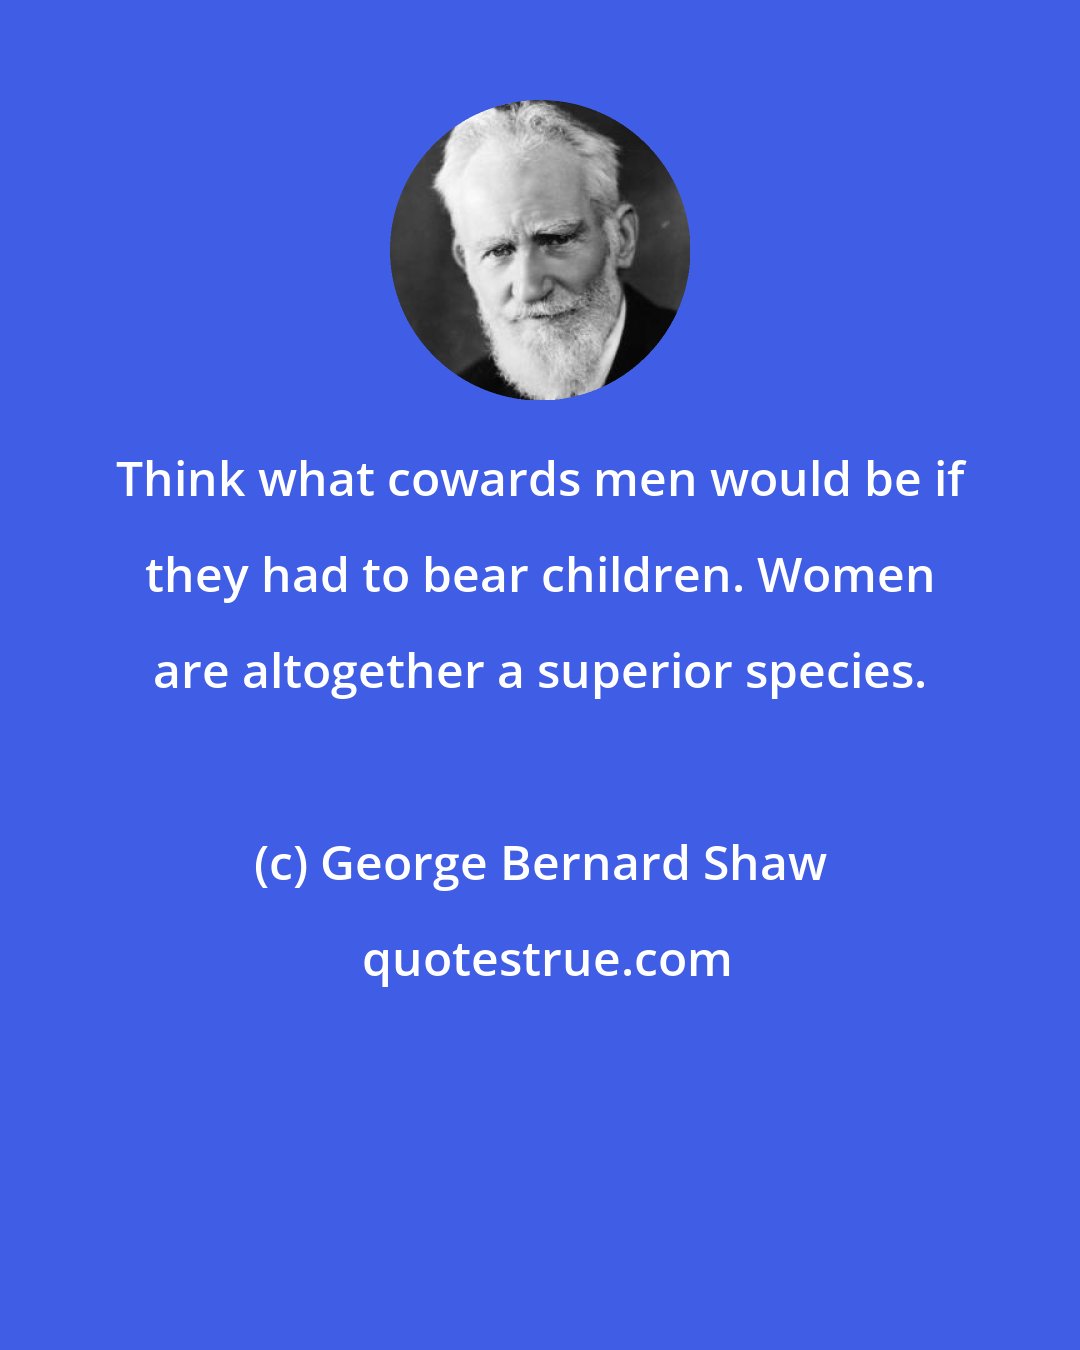 George Bernard Shaw: Think what cowards men would be if they had to bear children. Women are altogether a superior species.